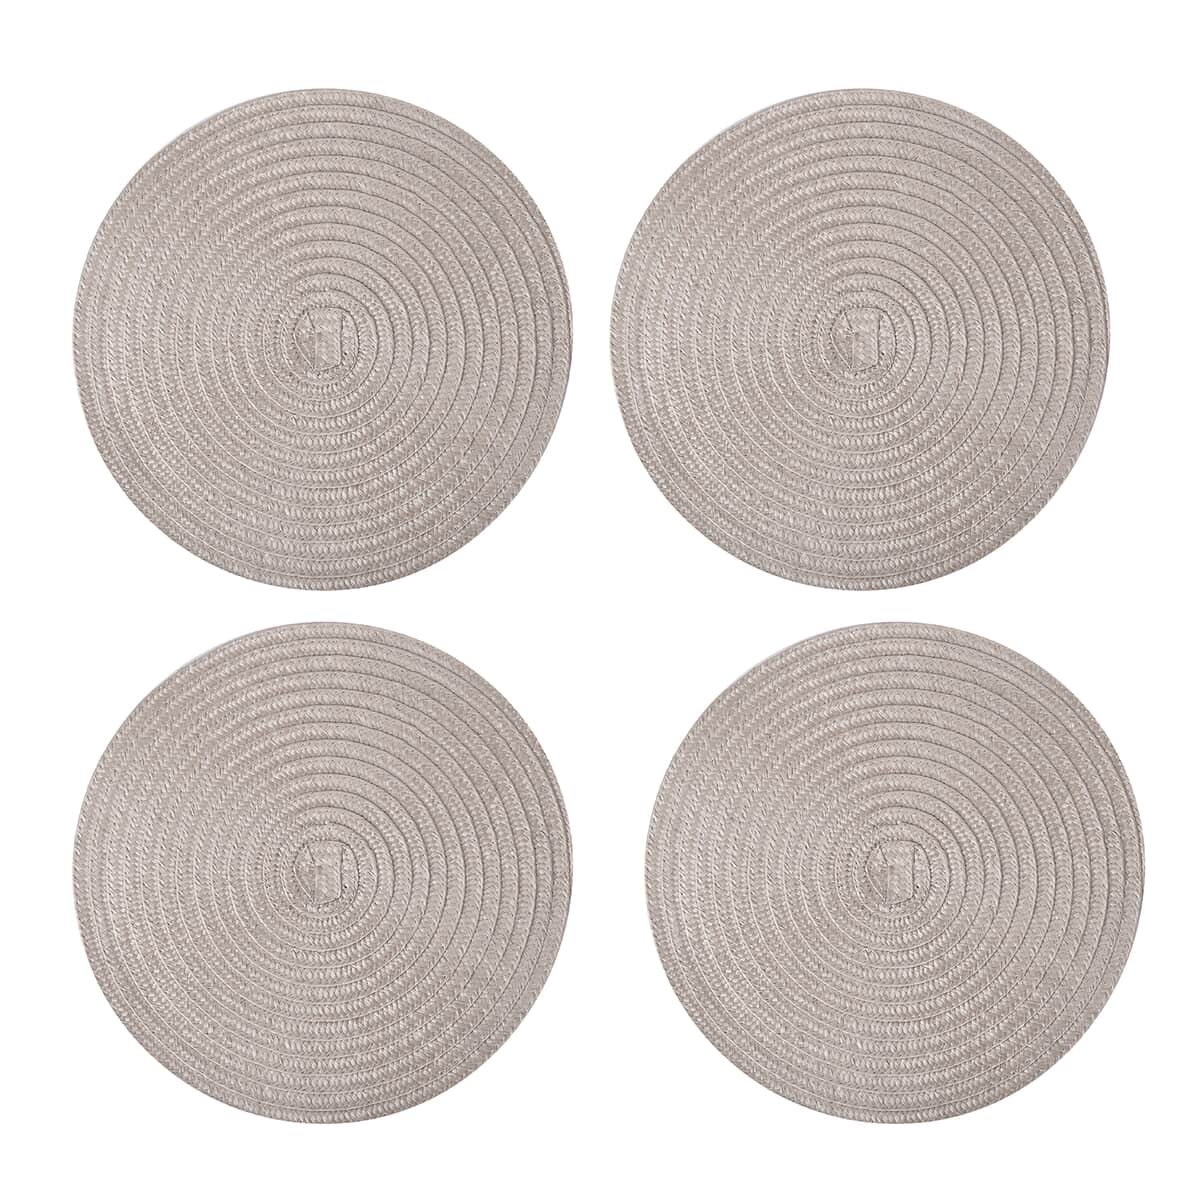 Set of 4 Beige Polypropylene and Polyester Placemat (14.9"x14.9") image number 0